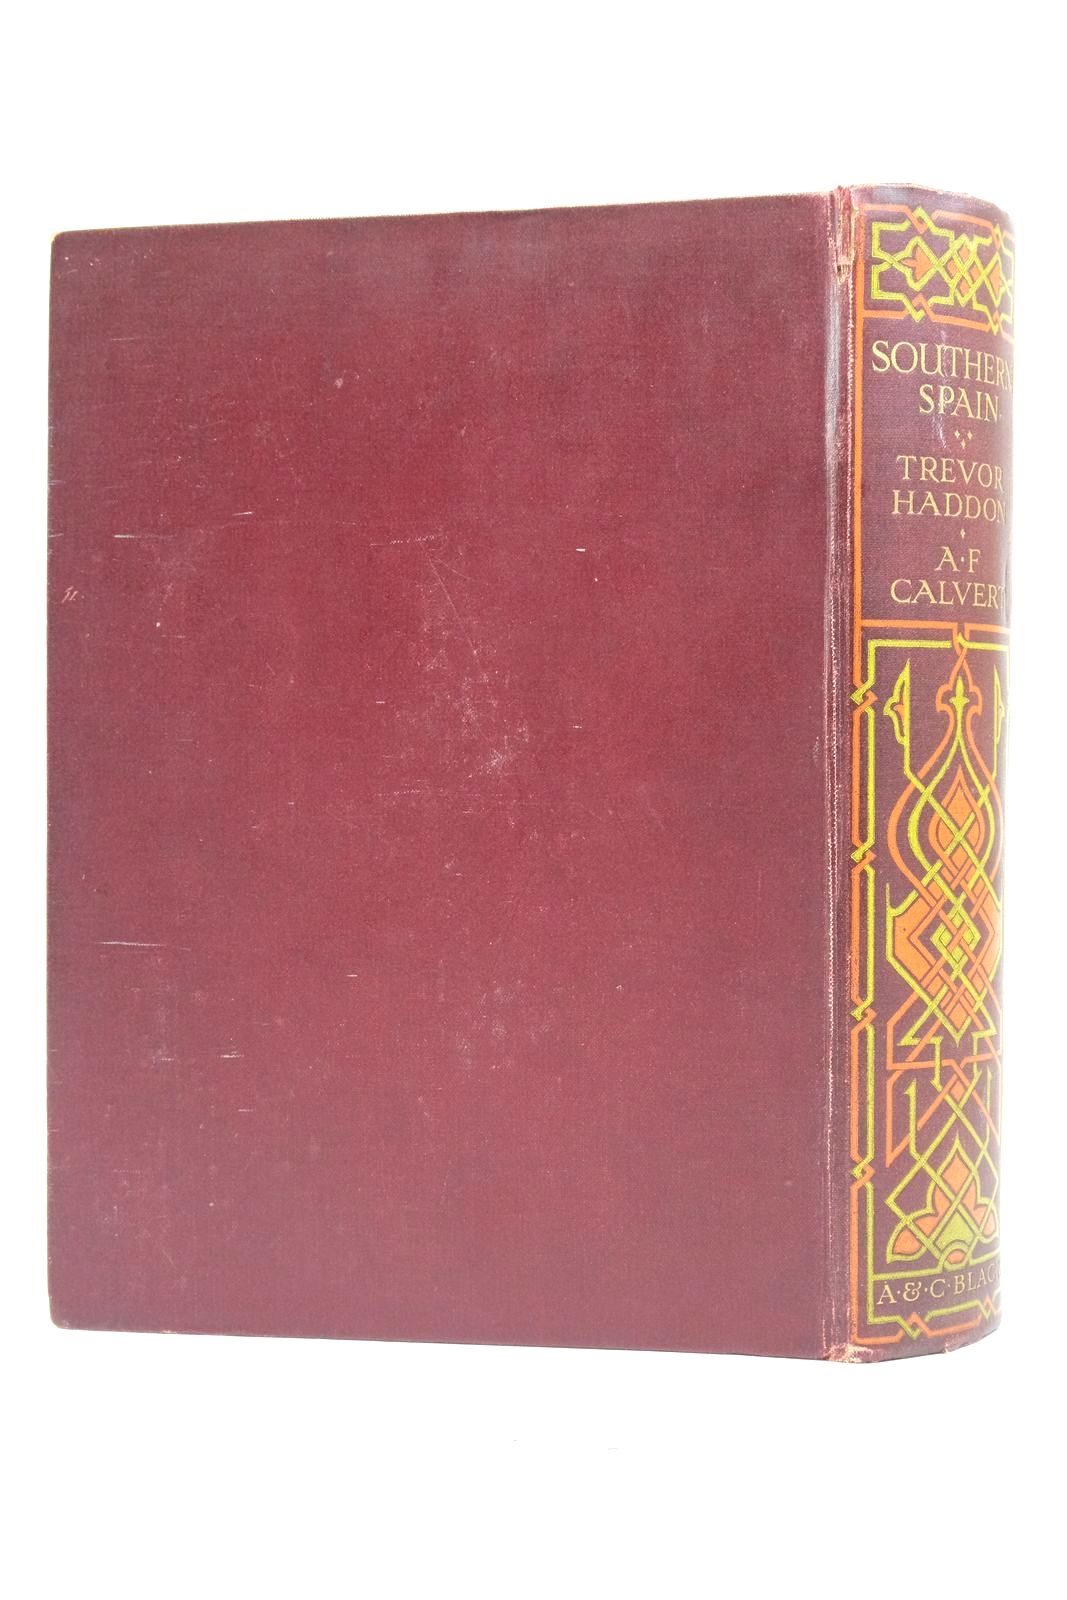 Photo of SOUTHERN SPAIN written by Calvert, A.F. illustrated by Haddon, Trevor published by A. & C. Black (STOCK CODE: 2137431)  for sale by Stella & Rose's Books